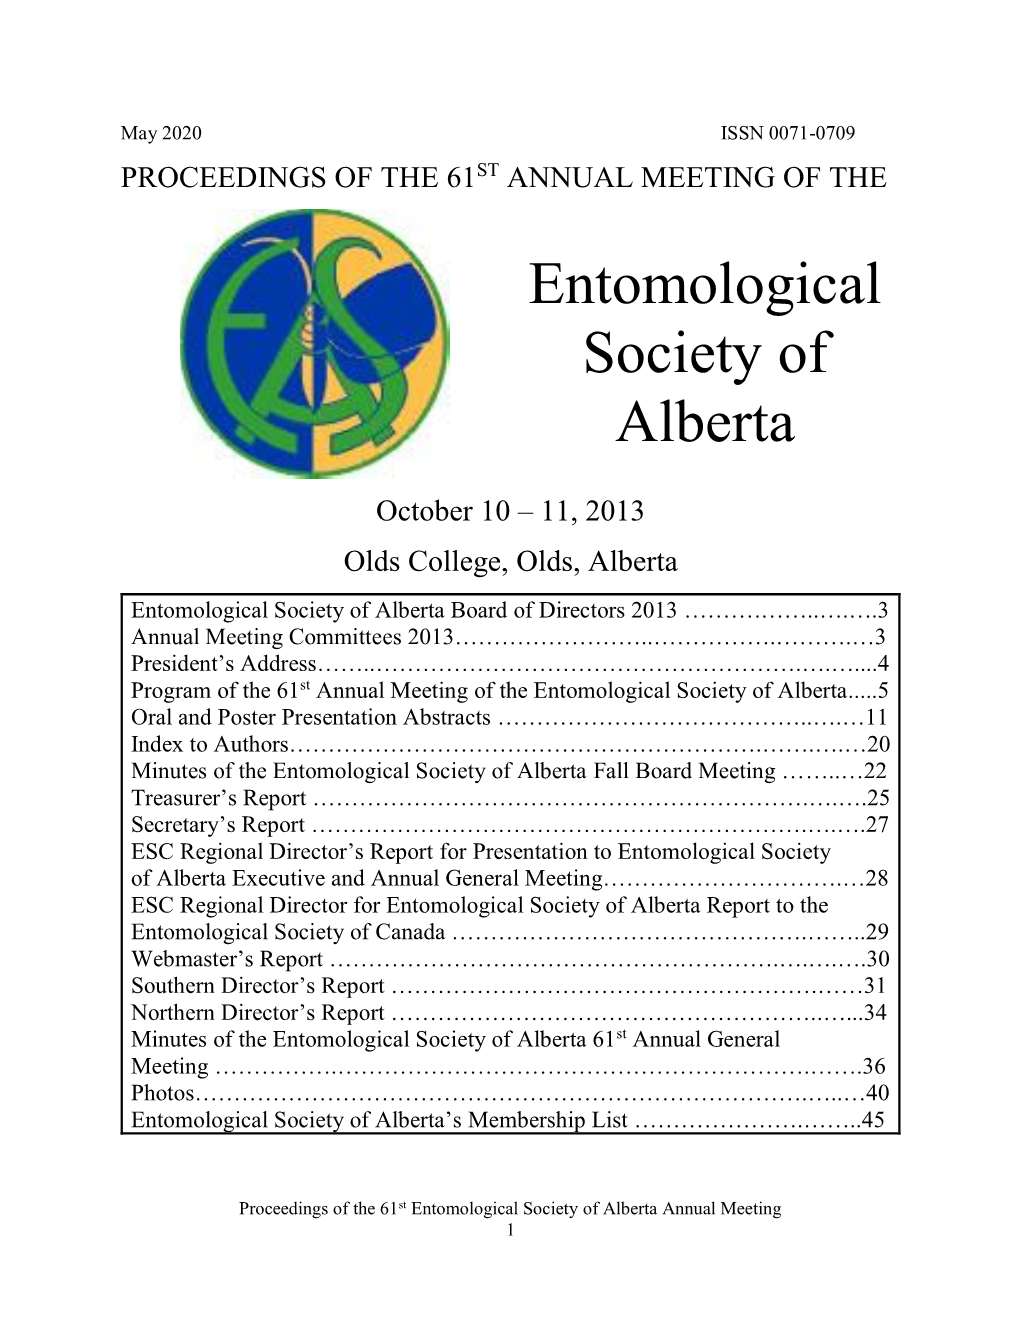 Proceedings of the 61St Annual Meeting of The